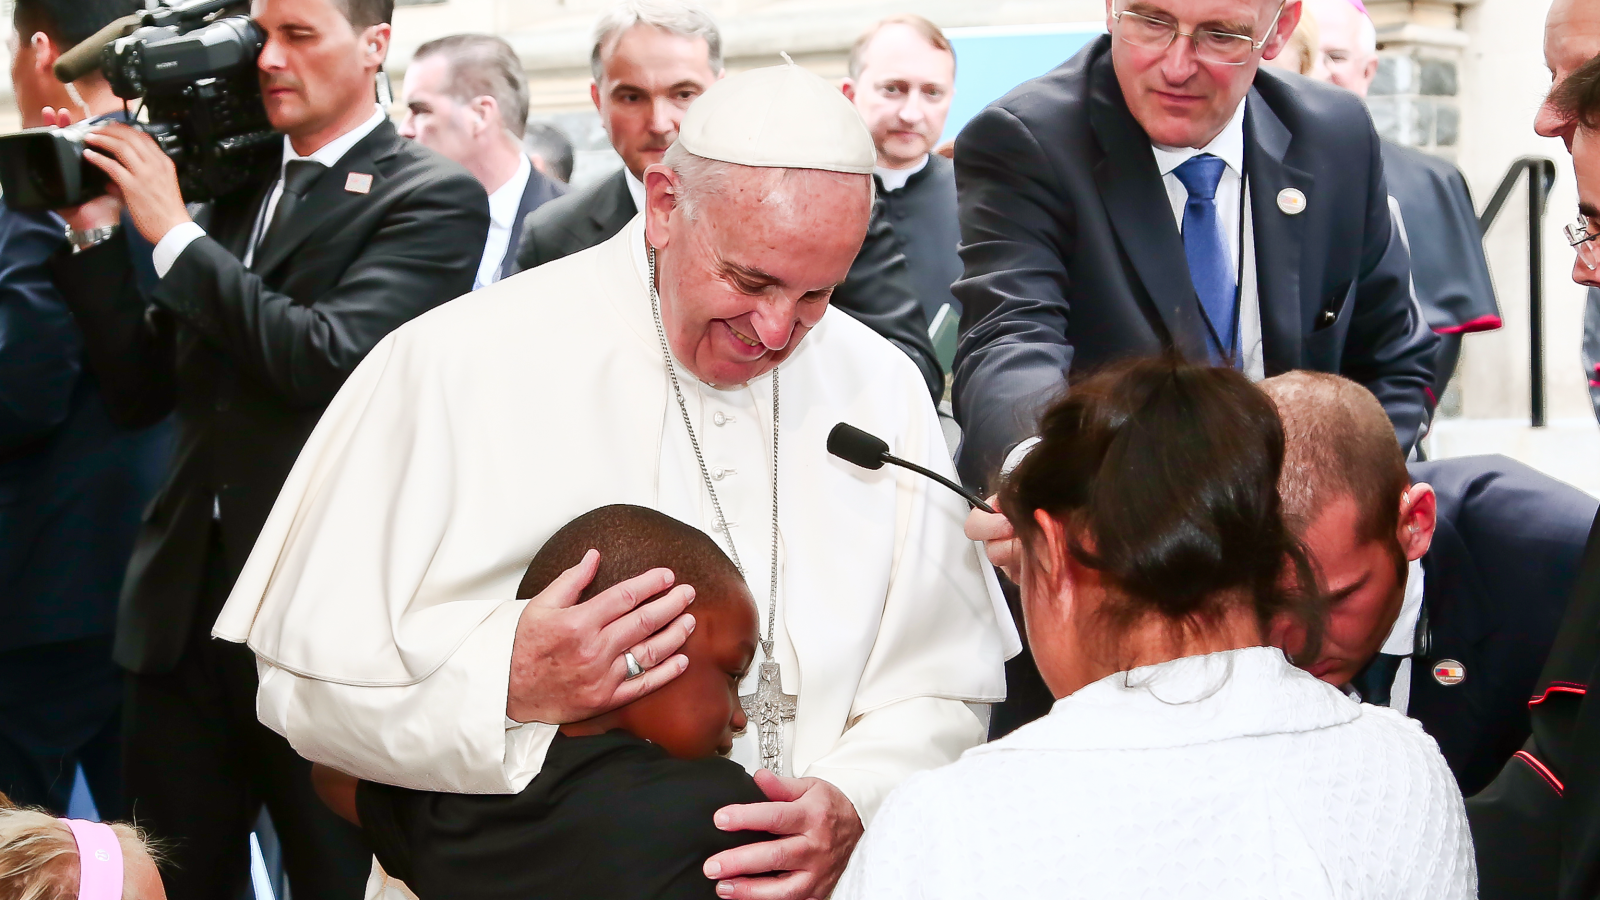 Pope Francis with young boy at Catholic Charities Luncheon in Washington, DC, on September 24, 2015